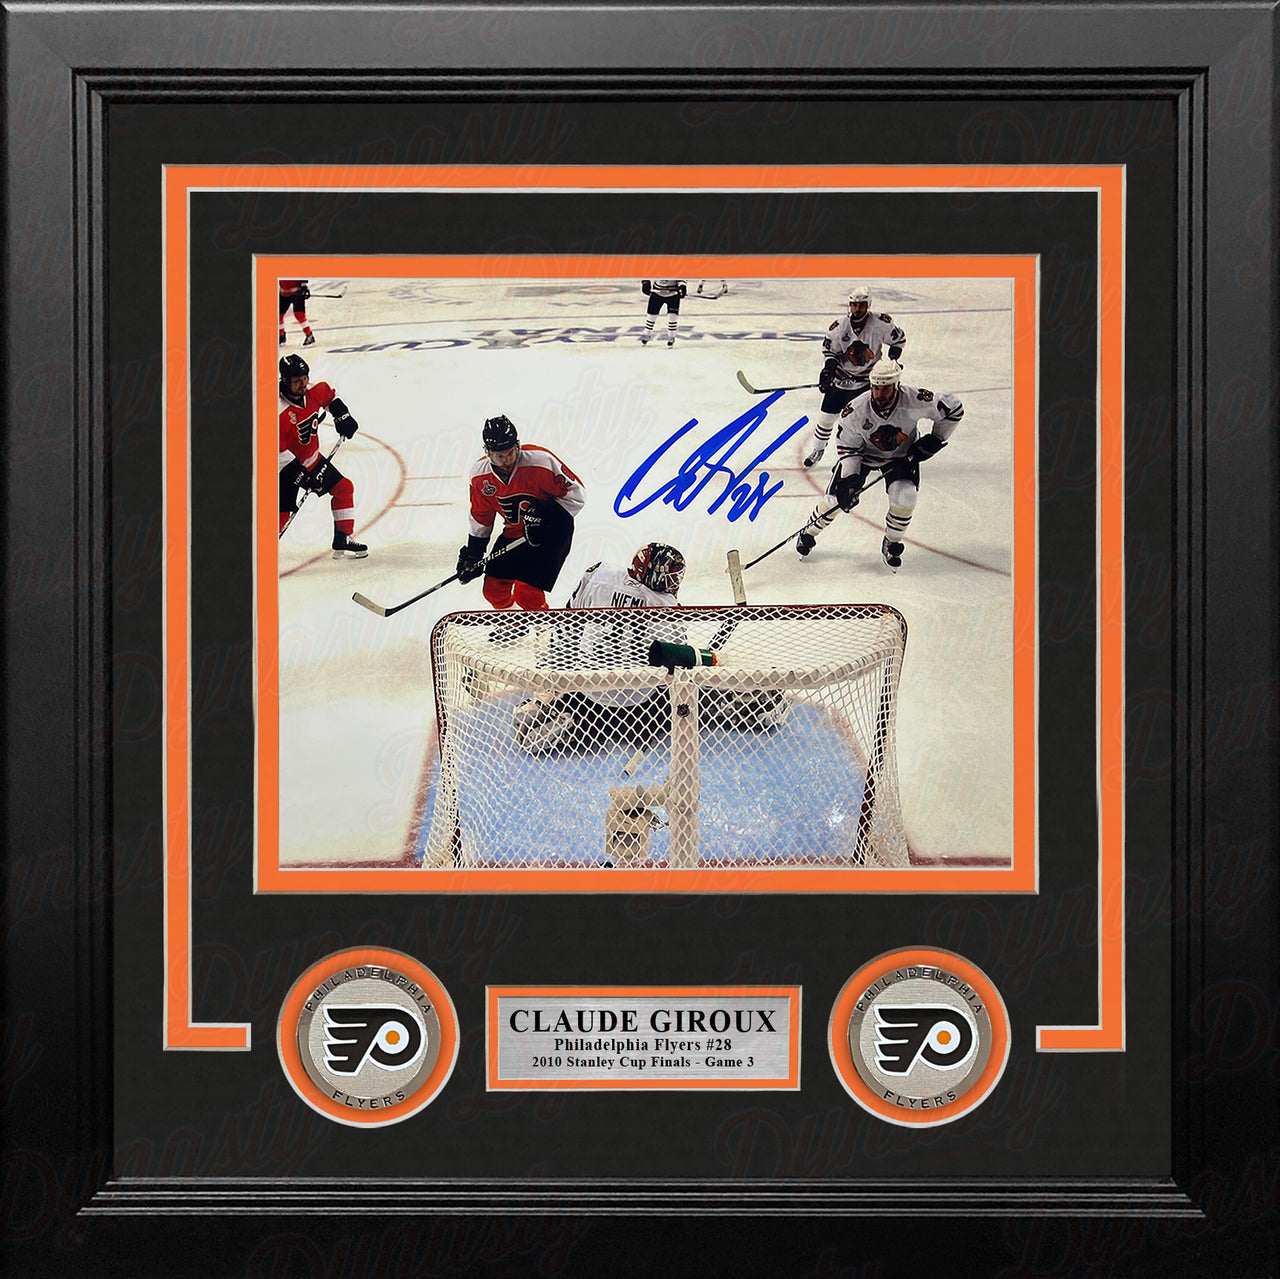 Claude Giroux 2010 Stanley Cup Finals Game 3 Philadelphia Flyers Autographed 8" x 10" Framed Photo